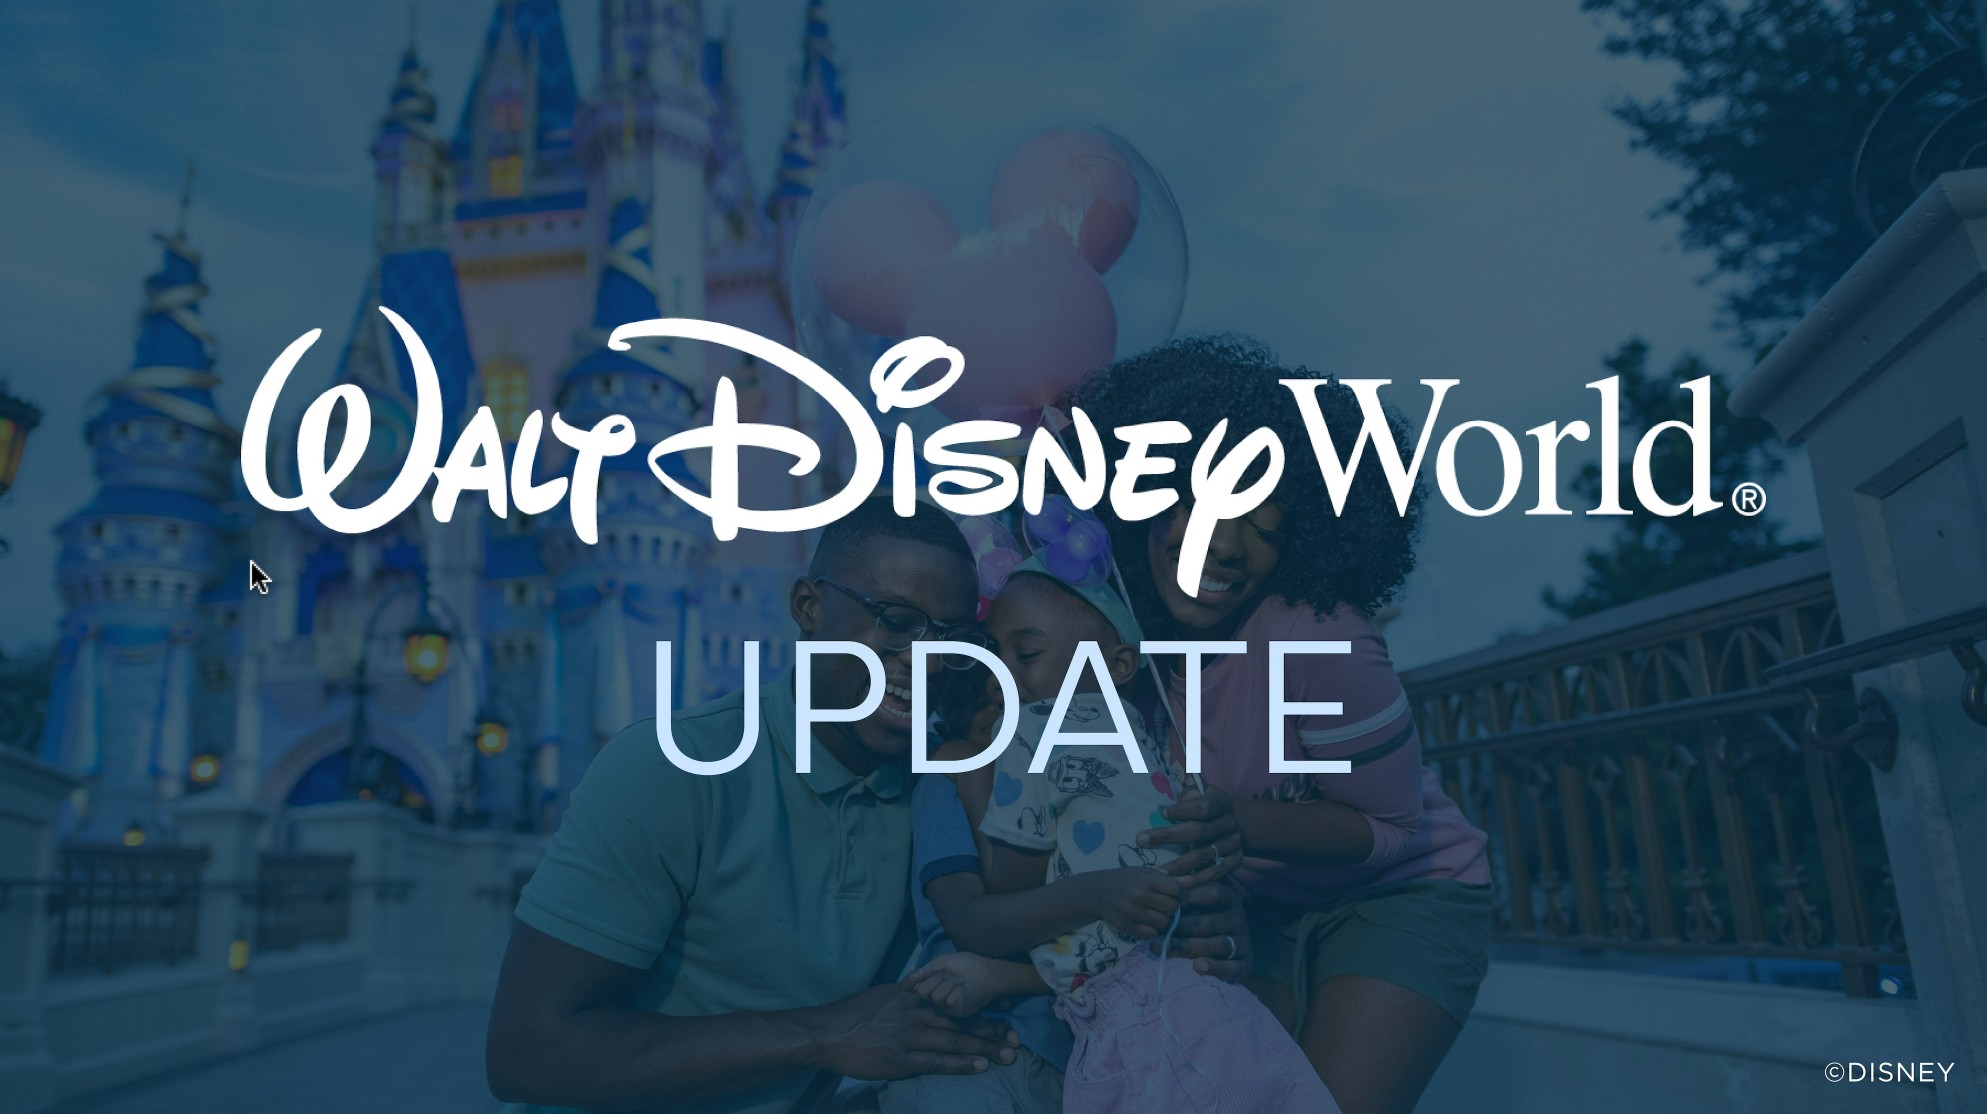 3 Changes Walt Disney World Is Making to Bring More Value & Flexibility to Your Visits